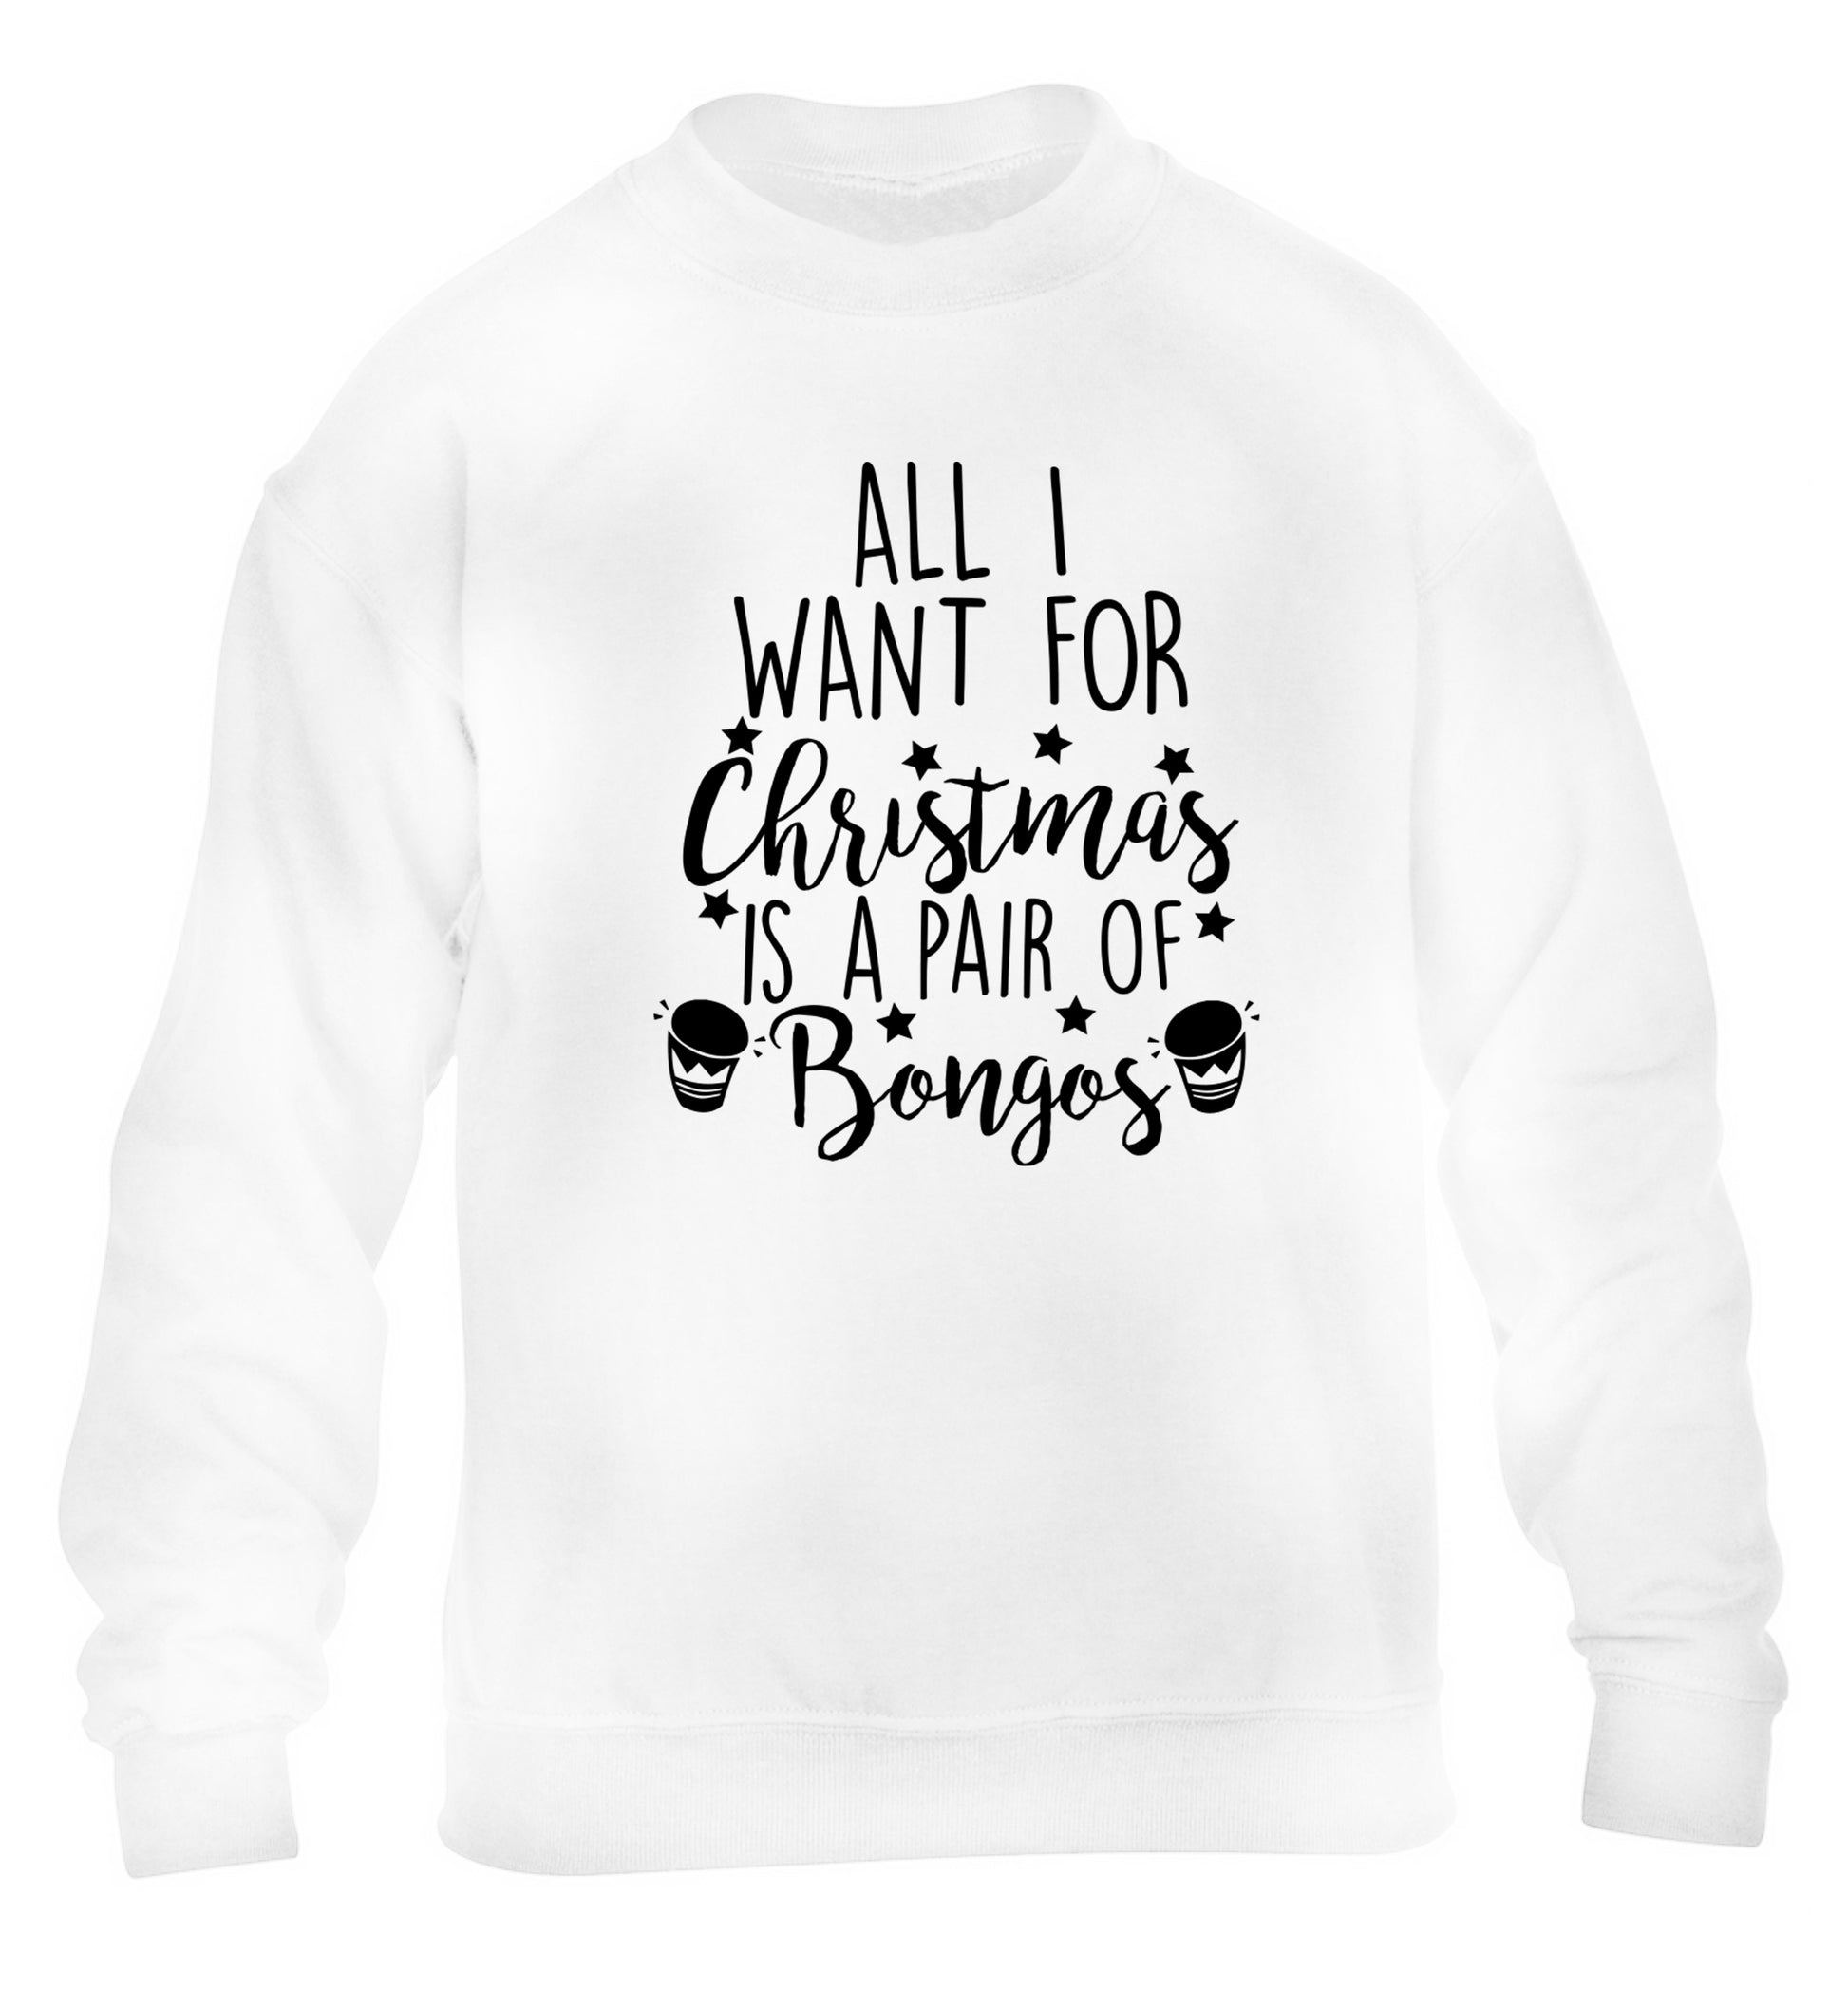 All I want for Christmas is a pair of bongos! children's white sweater 12-14 Years